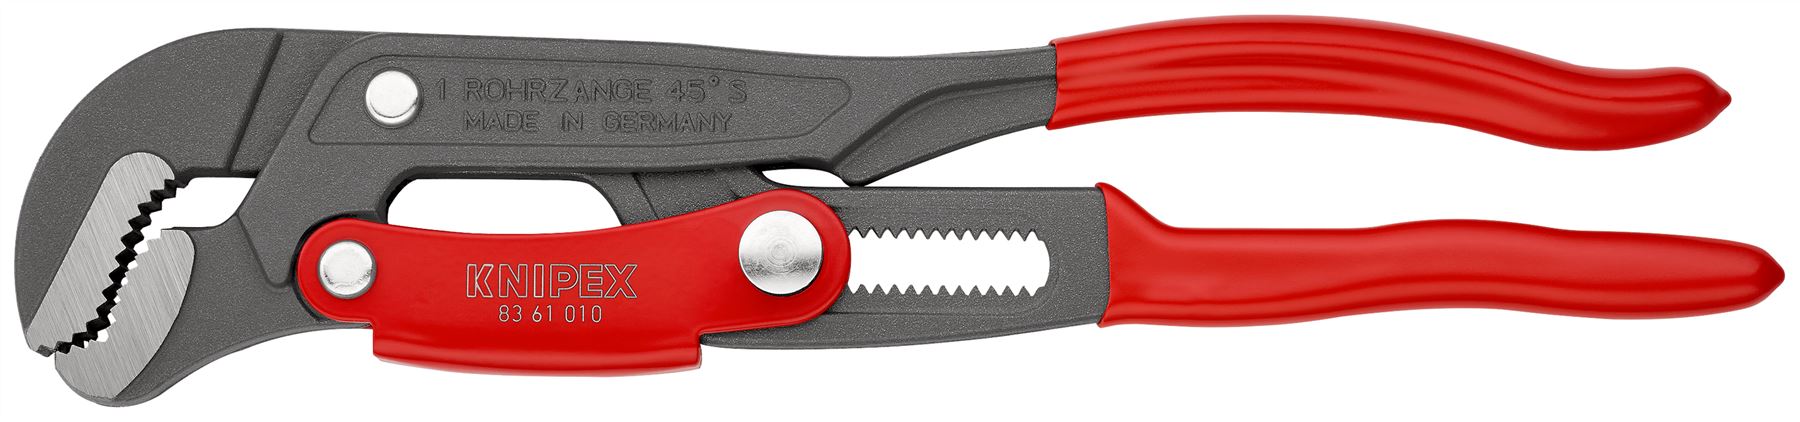 KNIPEX Pipe Wrench S-Type with Fast Adjustment 330mm Grey Powder Coated Plastic Coated Handles 83 61 010